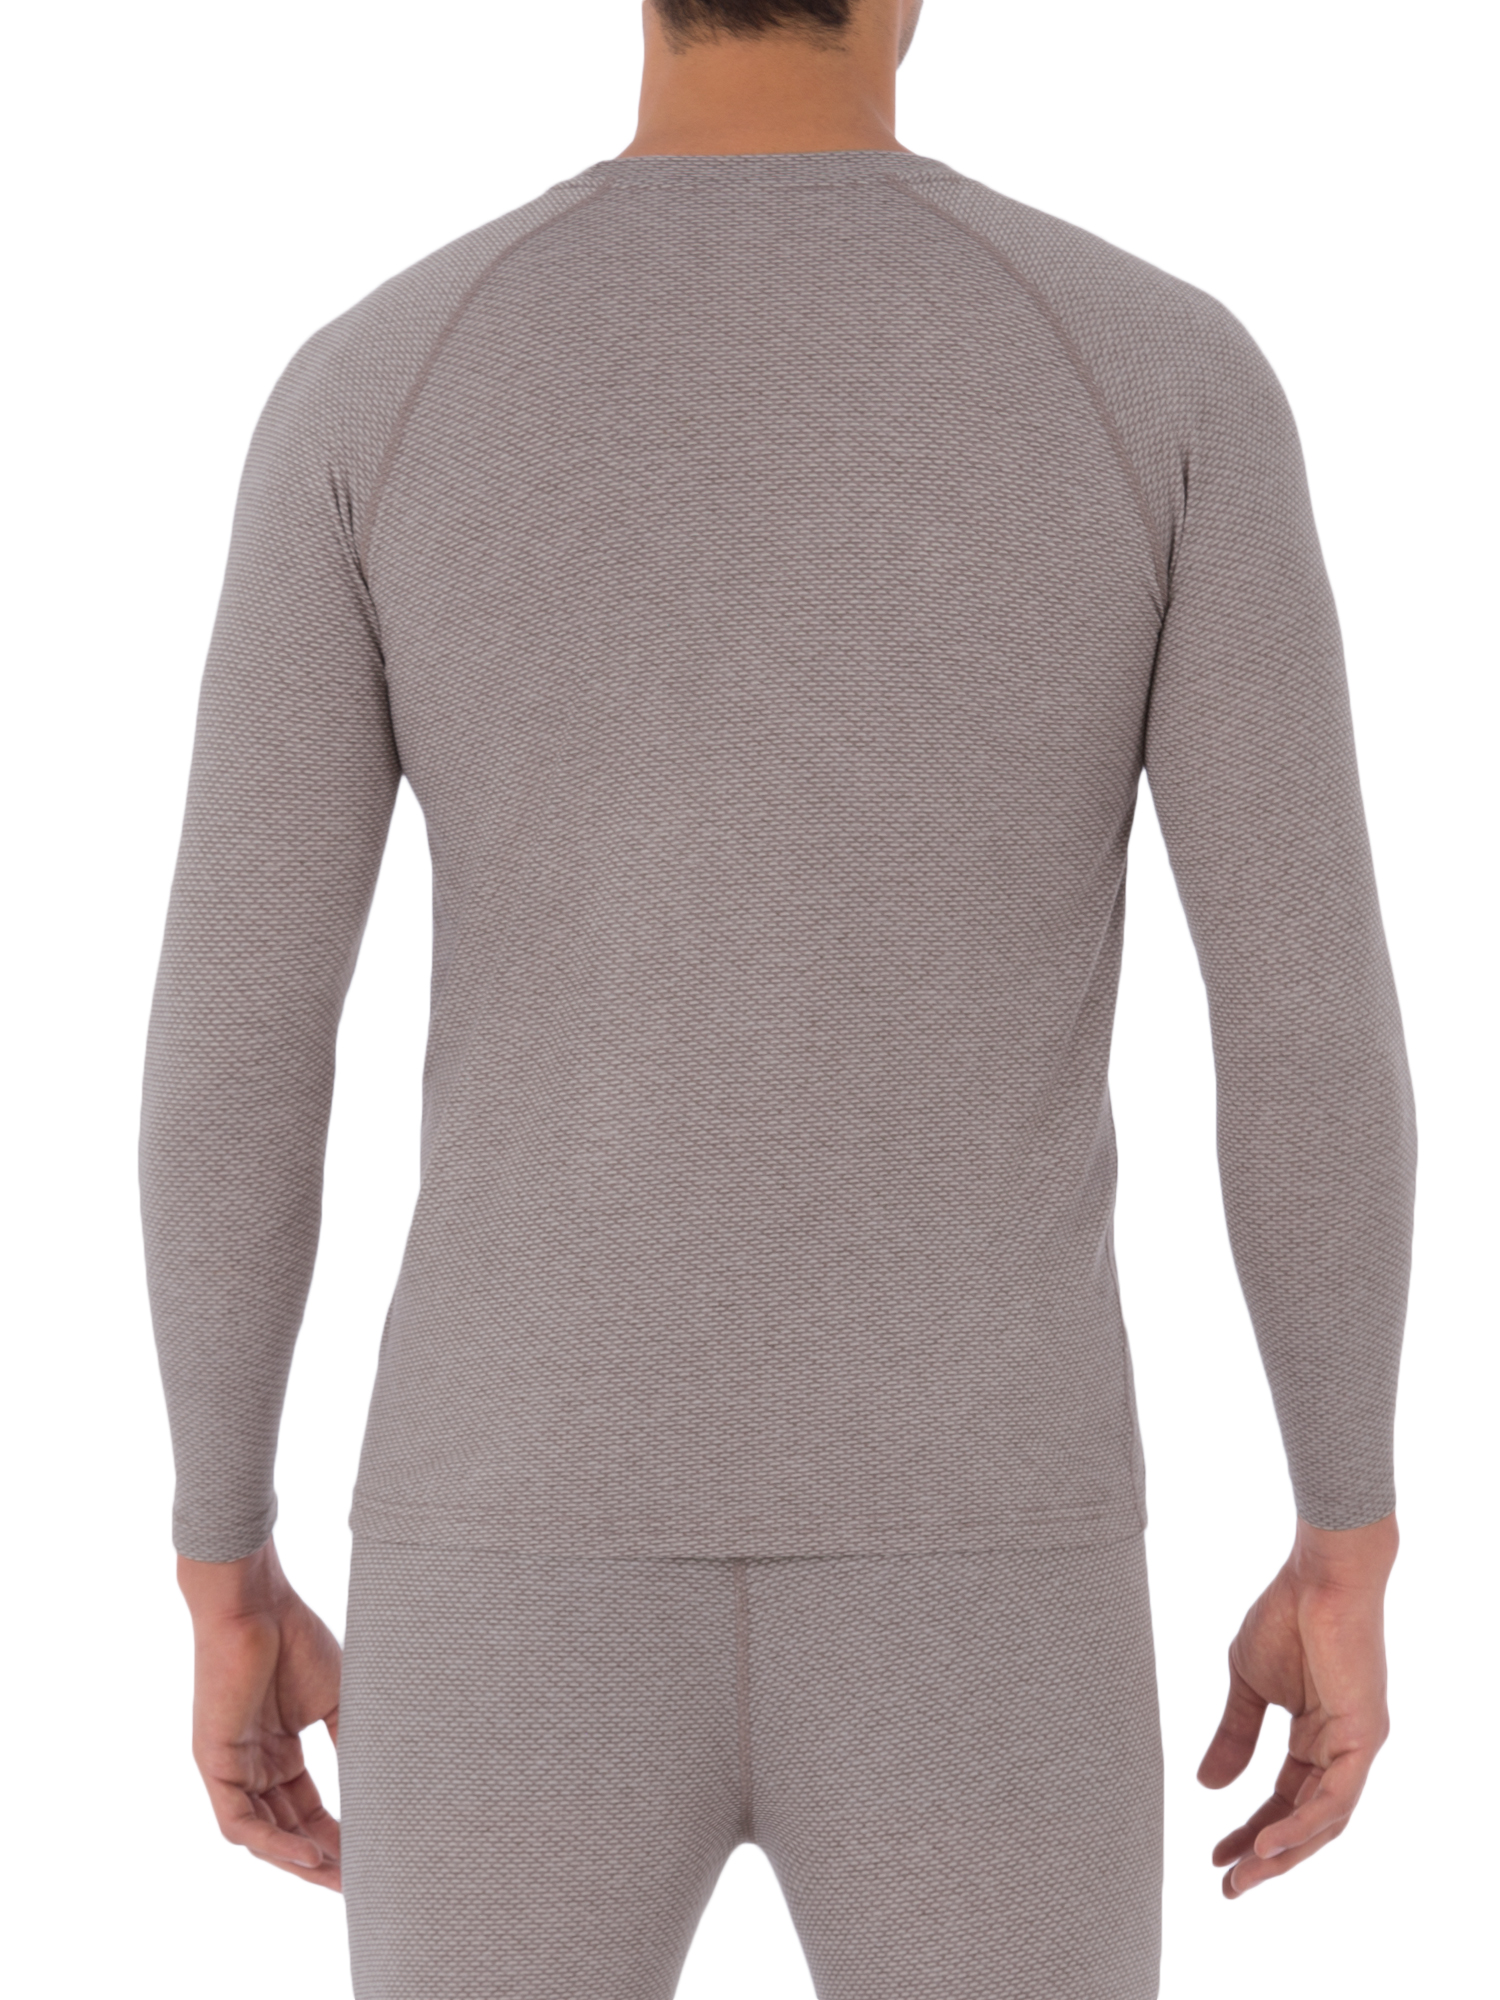 Fruit of the Loom Big Men's Breathable Super Cozy Thermal Shirt Underwear for Men - image 2 of 5